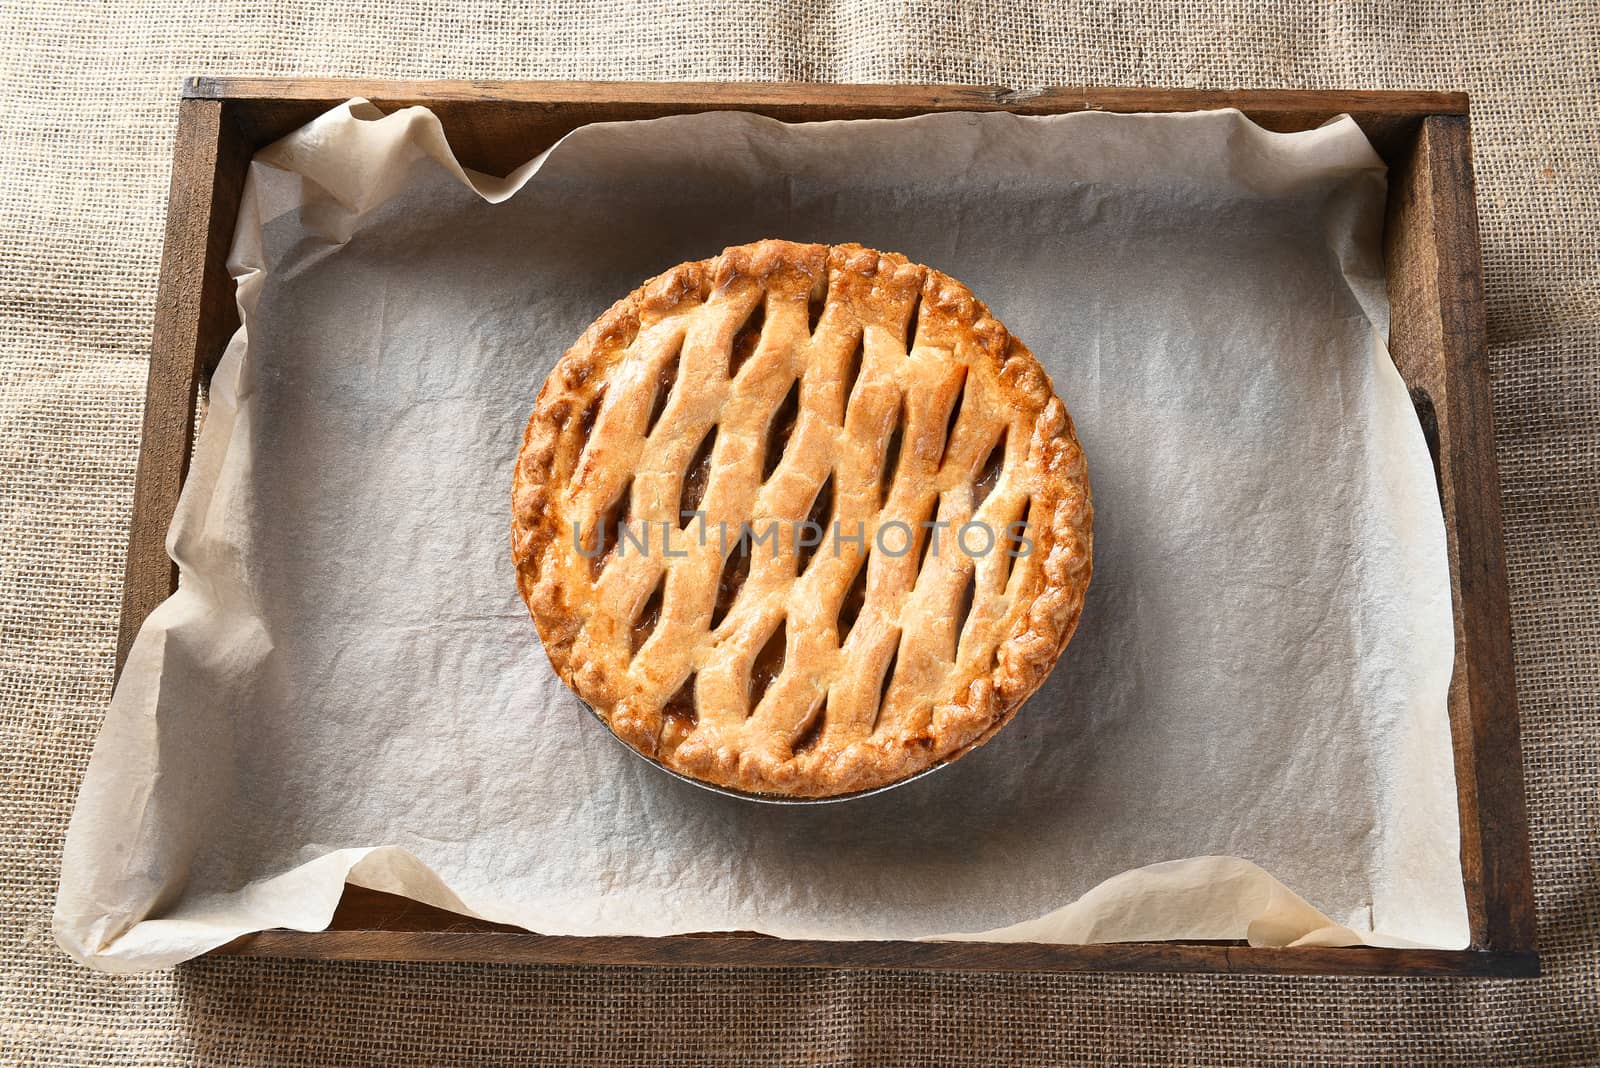 Overhead view of an Apple pie in a wood box with parchment paper. The fresh baked pie is cooling on a table with a burlap table cloth.